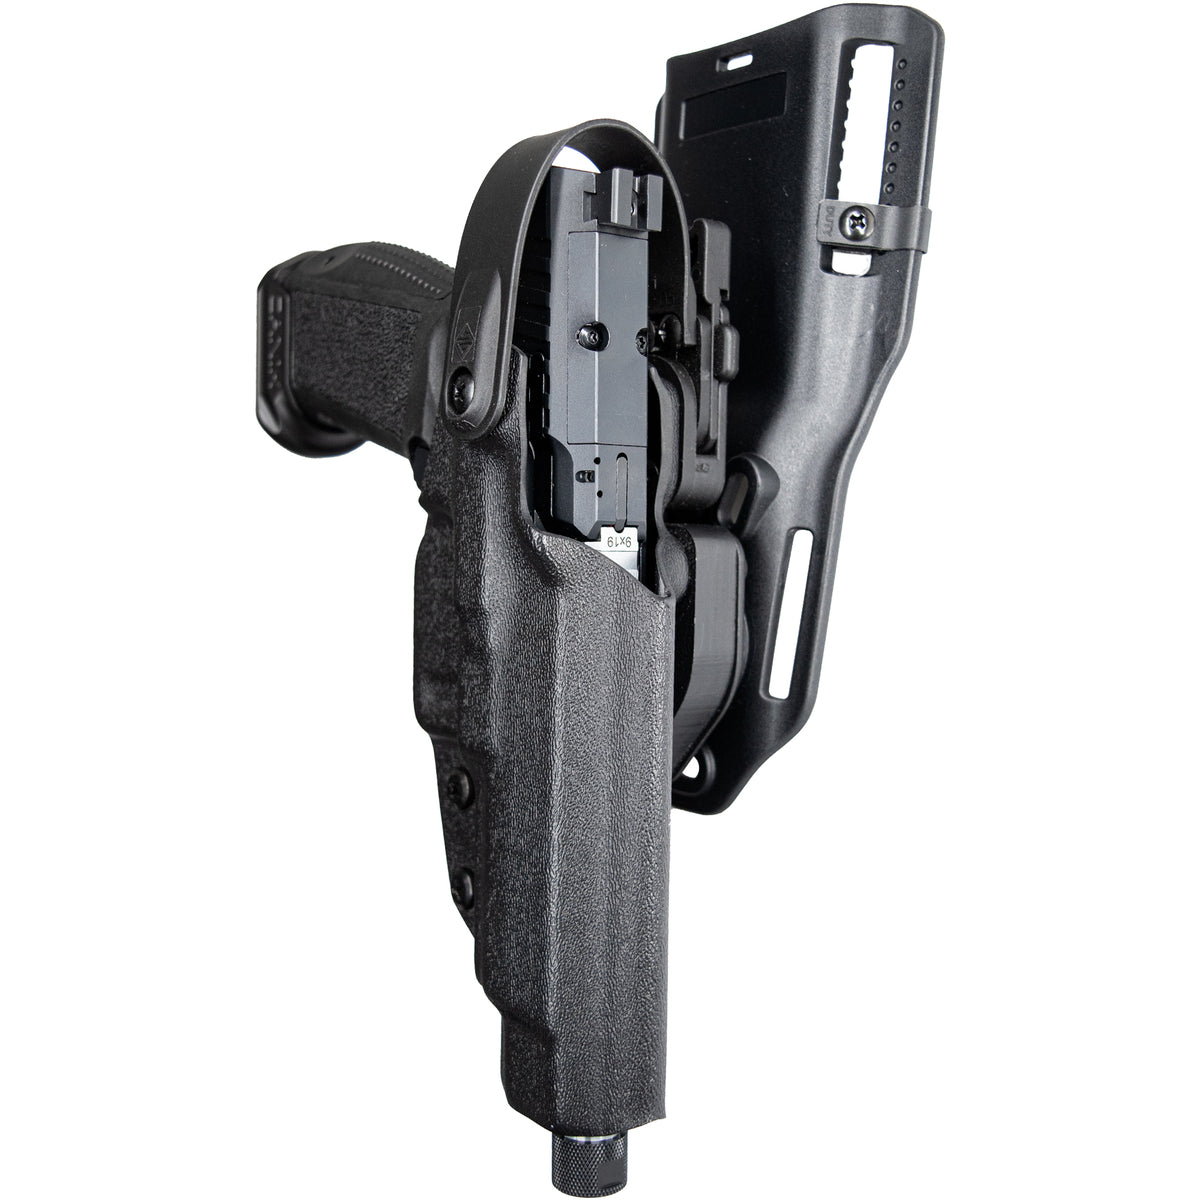 New Drop Offset Holster with Thigh Strap - DARA HOLSTERS & GEAR